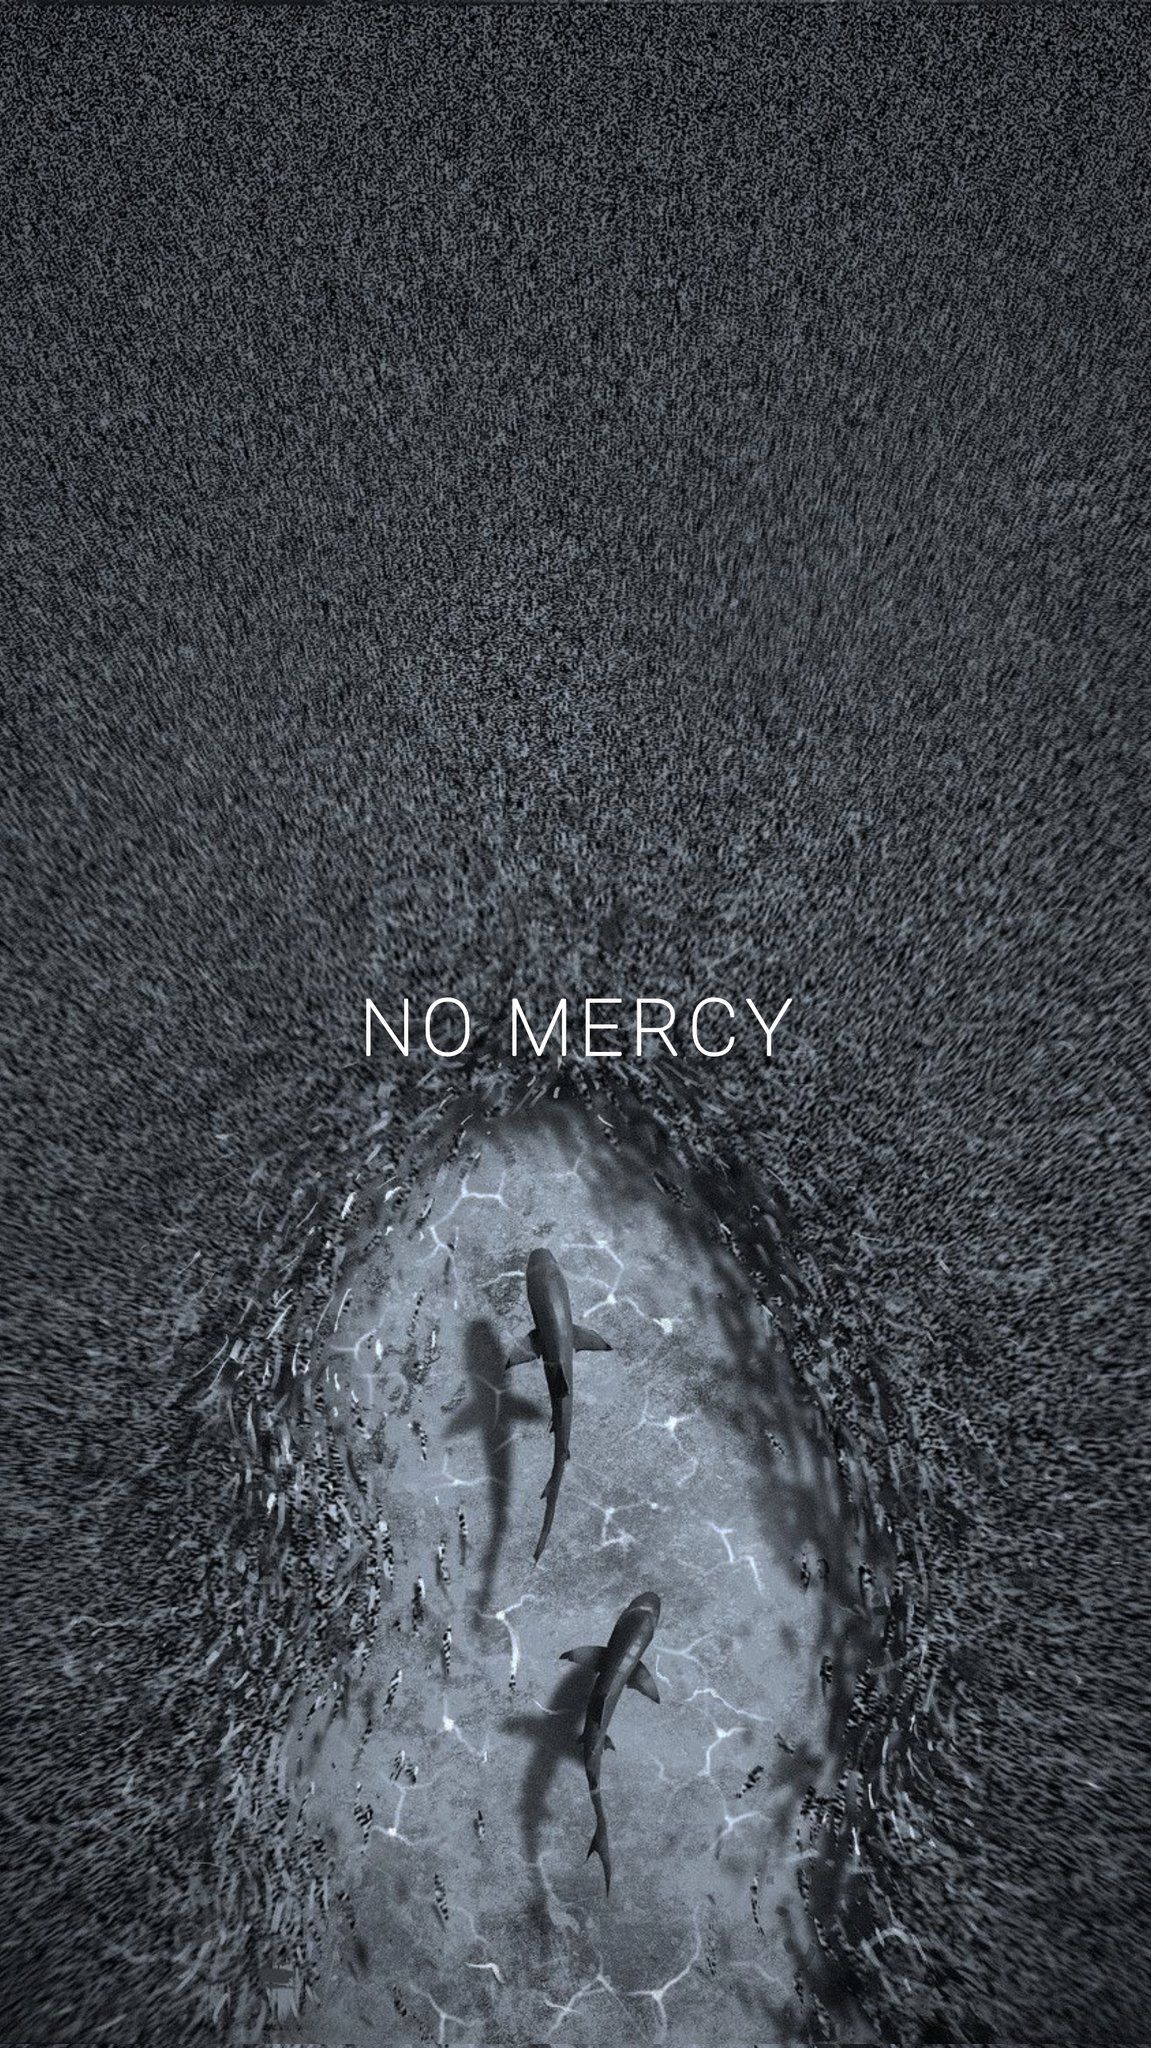 The poster for No Mercy, showing two sharks swimming in the water. - Gym